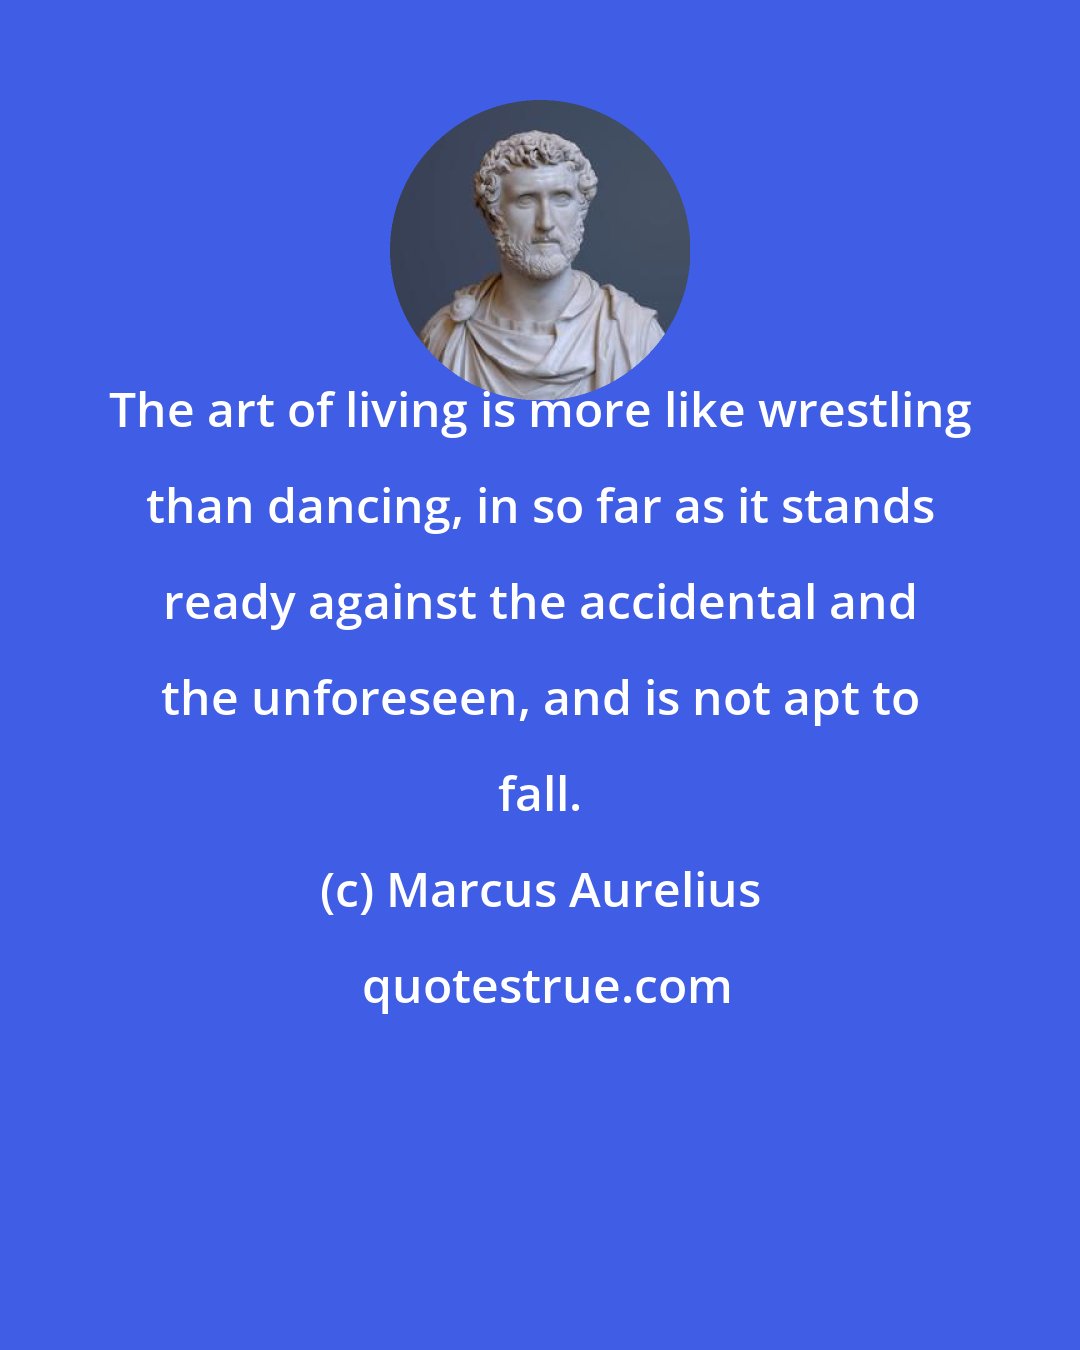 Marcus Aurelius: The art of living is more like wrestling than dancing, in so far as it stands ready against the accidental and the unforeseen, and is not apt to fall.